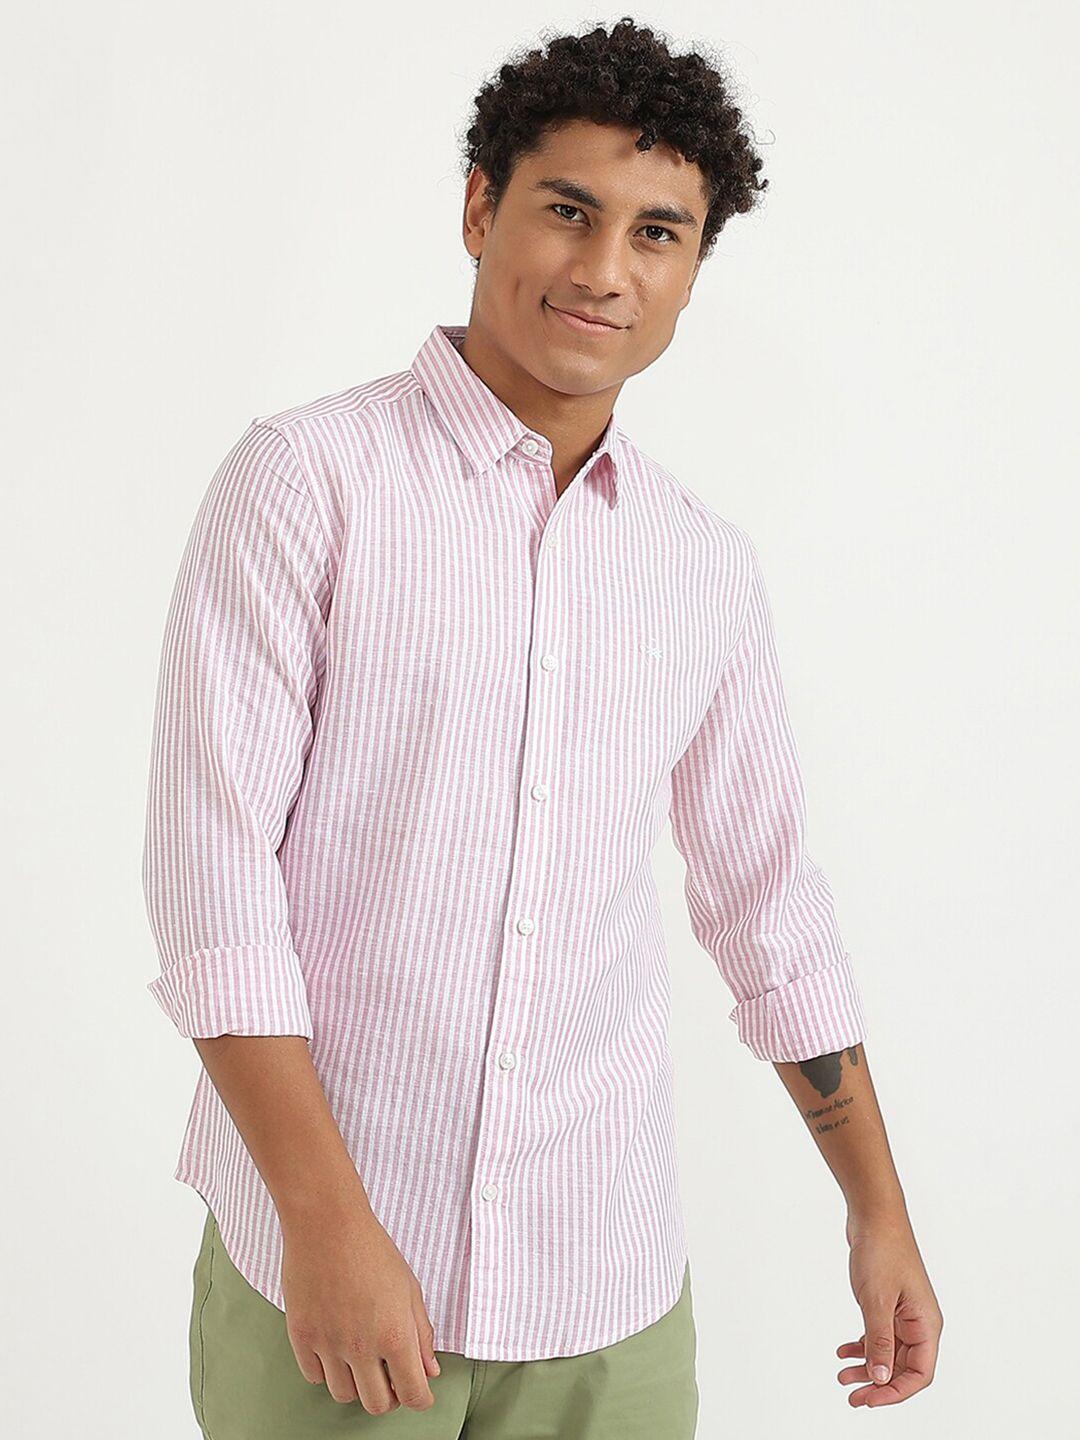 united-colors-of-benetton-men-pink-slim-fit-striped-casual-shirt